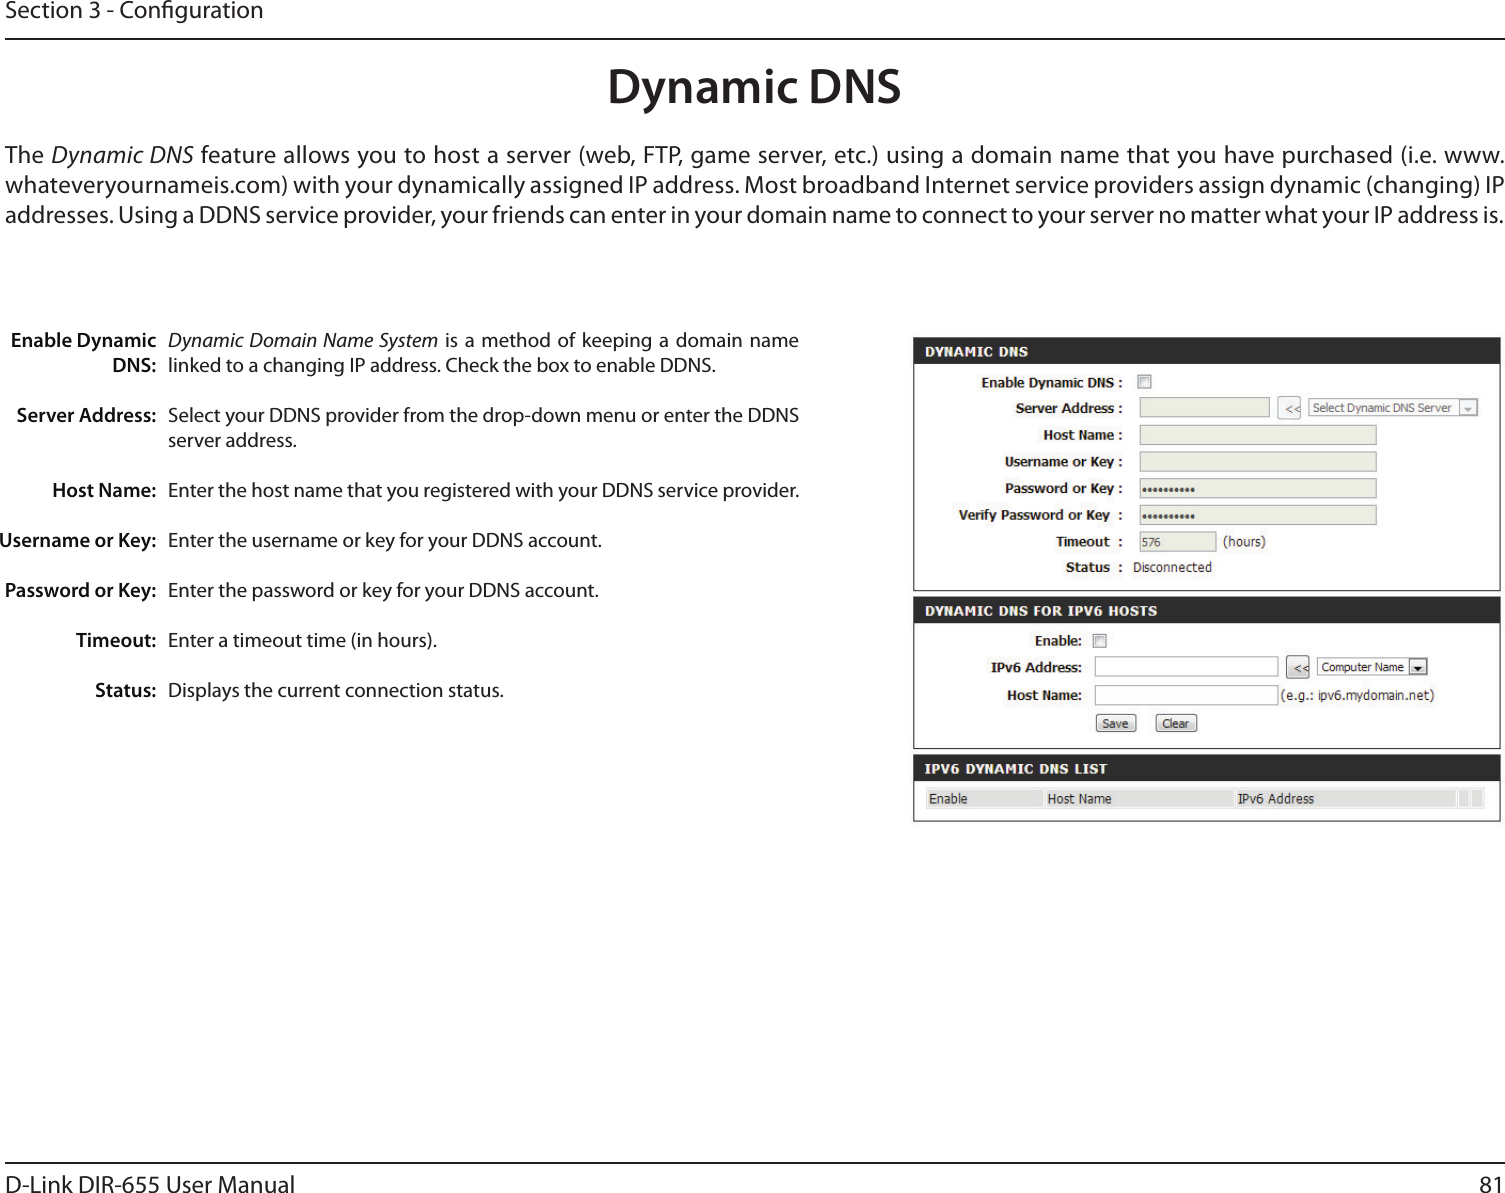 81D-Link DIR-655 User ManualSection 3 - CongurationDynamic Domain Name System is  a method  of keeping  a domain  name linked to a changing IP address. Check the box to enable DDNS.Select your DDNS provider from the drop-down menu or enter the DDNS server address.Enter the host name that you registered with your DDNS service provider.Enter the username or key for your DDNS account.Enter the password or key for your DDNS account.Enter a timeout time (in hours).Displays the current connection status.Enable Dynamic DNS:Server Address:Host Name:Username or Key:Password or Key:Timeout:Status:Dynamic DNSThe Dynamic DNS feature allows you to host a server (web, FTP, game server, etc.) using a domain name that you have purchased (i.e. www.whateveryournameis.com) with your dynamically assigned IP address. Most broadband Internet service providers assign dynamic (changing) IP addresses. Using a DDNS service provider, your friends can enter in your domain name to connect to your server no matter what your IP address is.